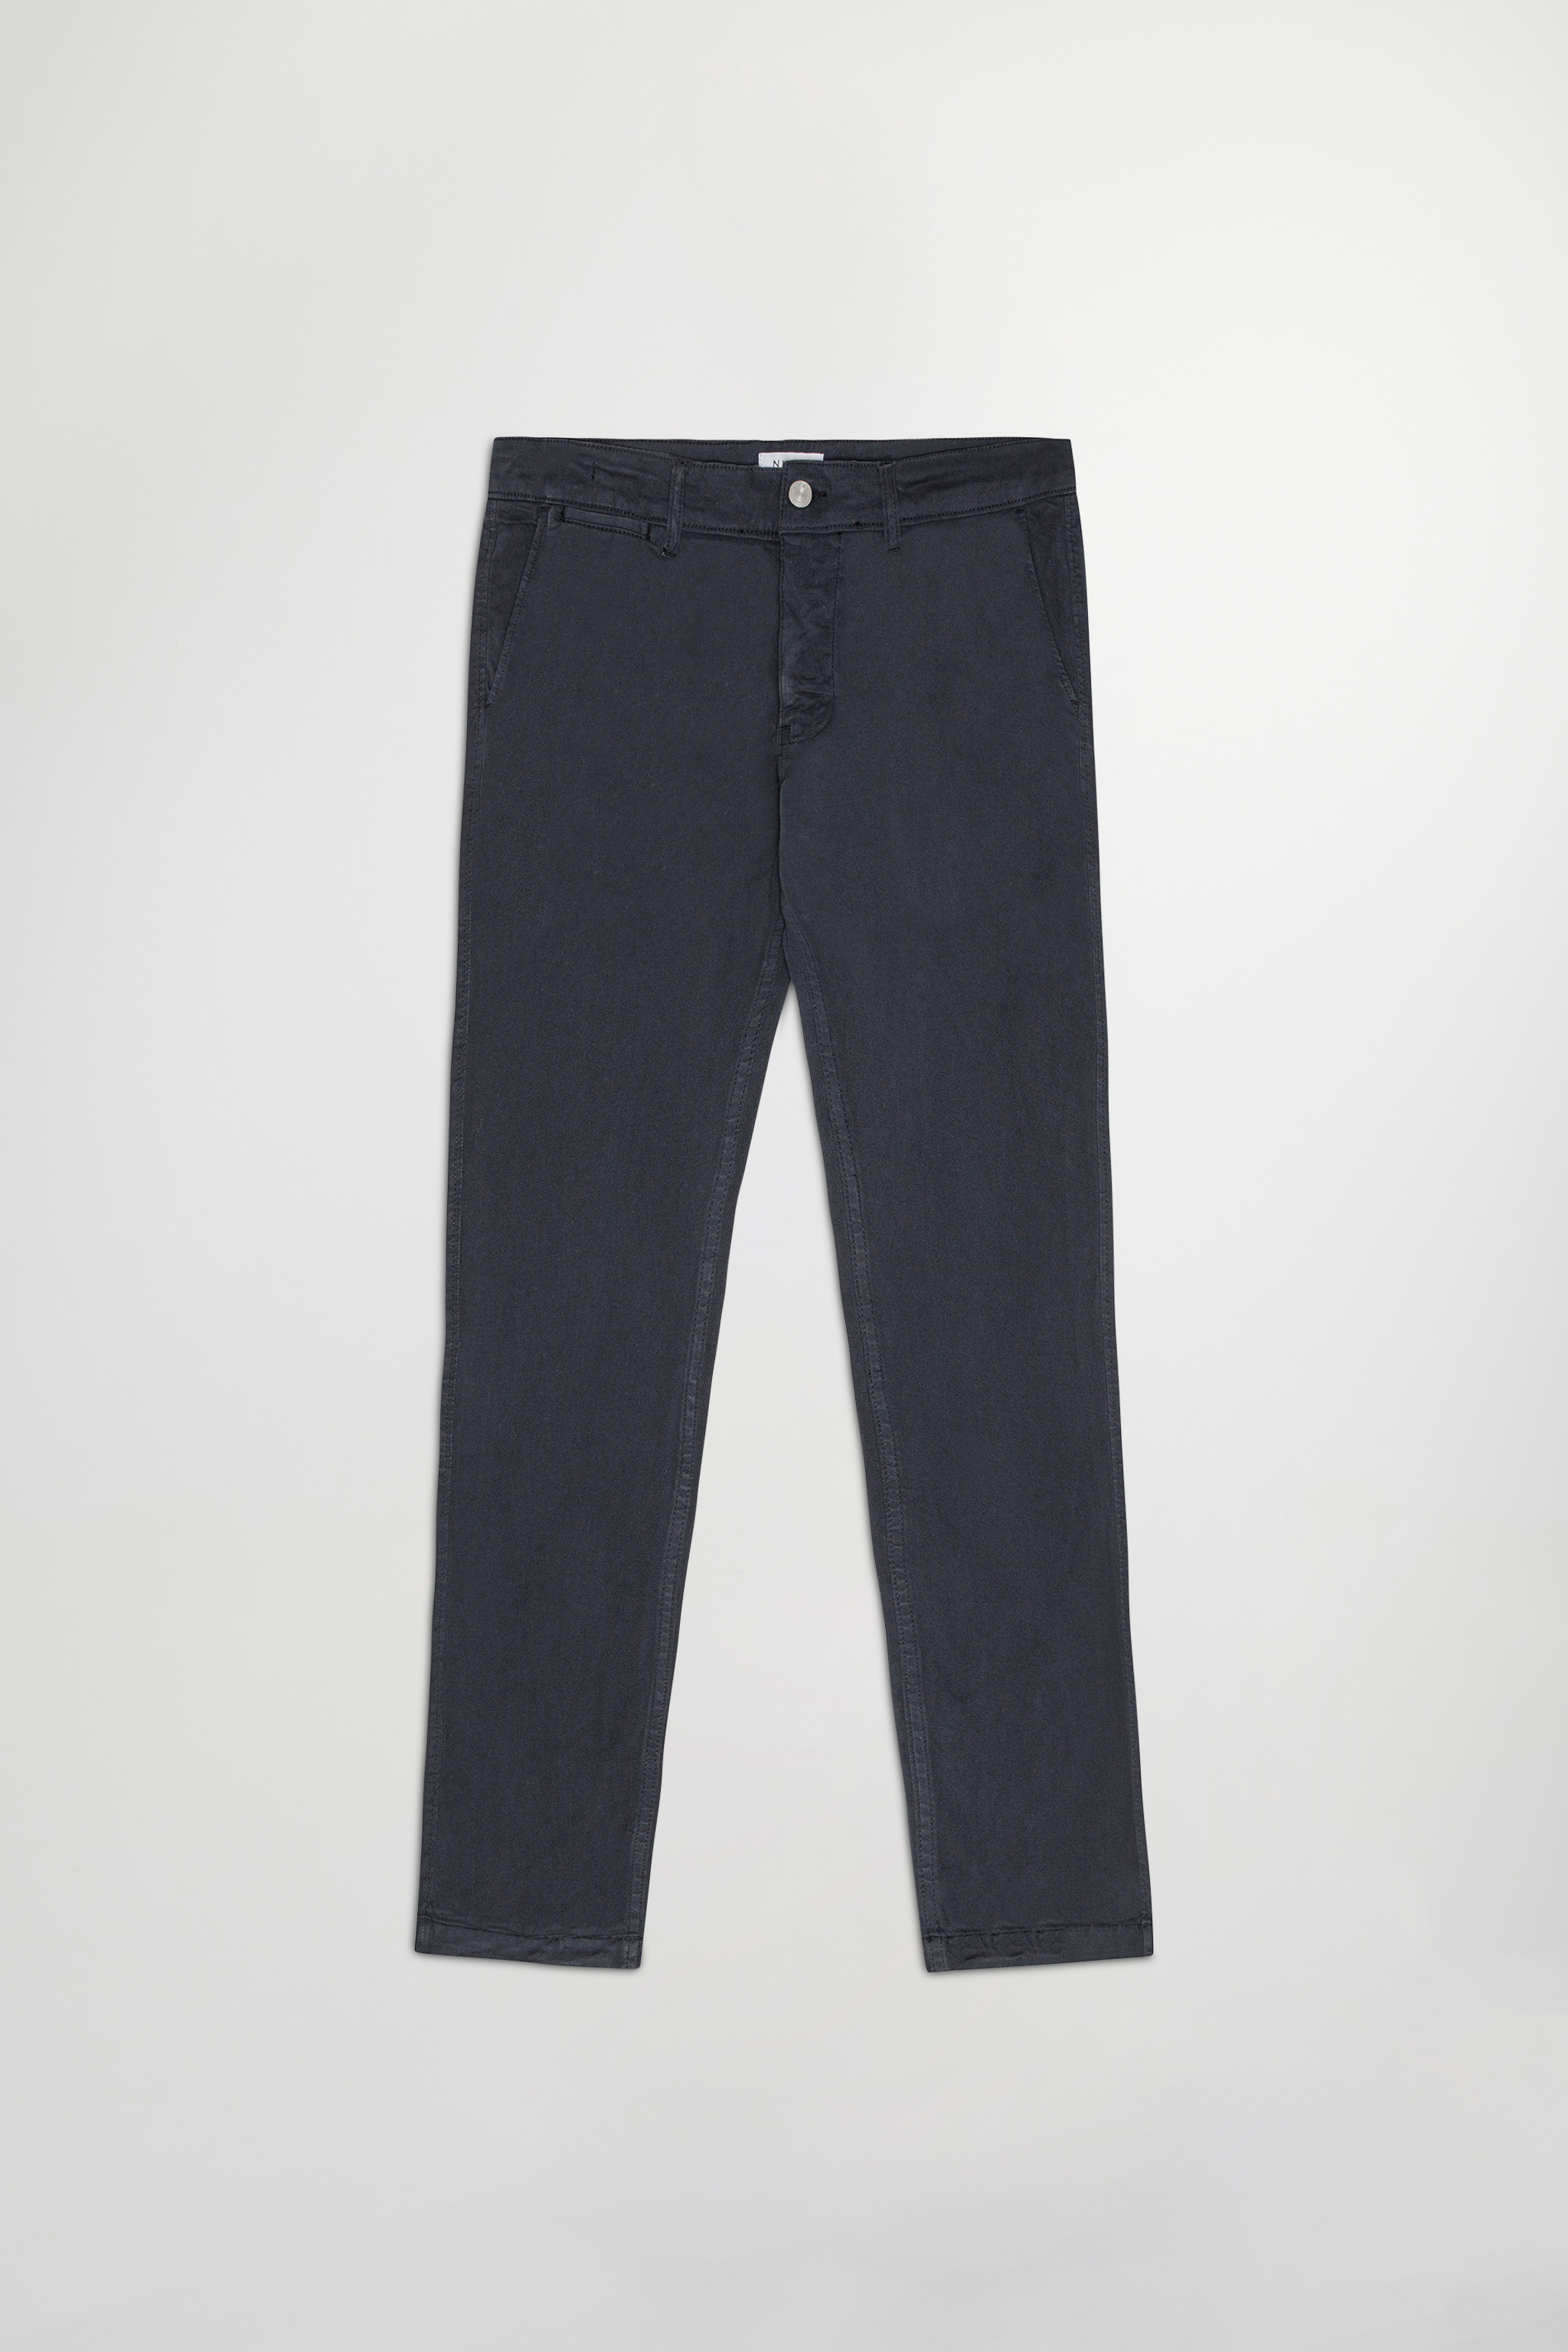 Marco 1400 men's chinos - Blue - Buy online at NN.07®